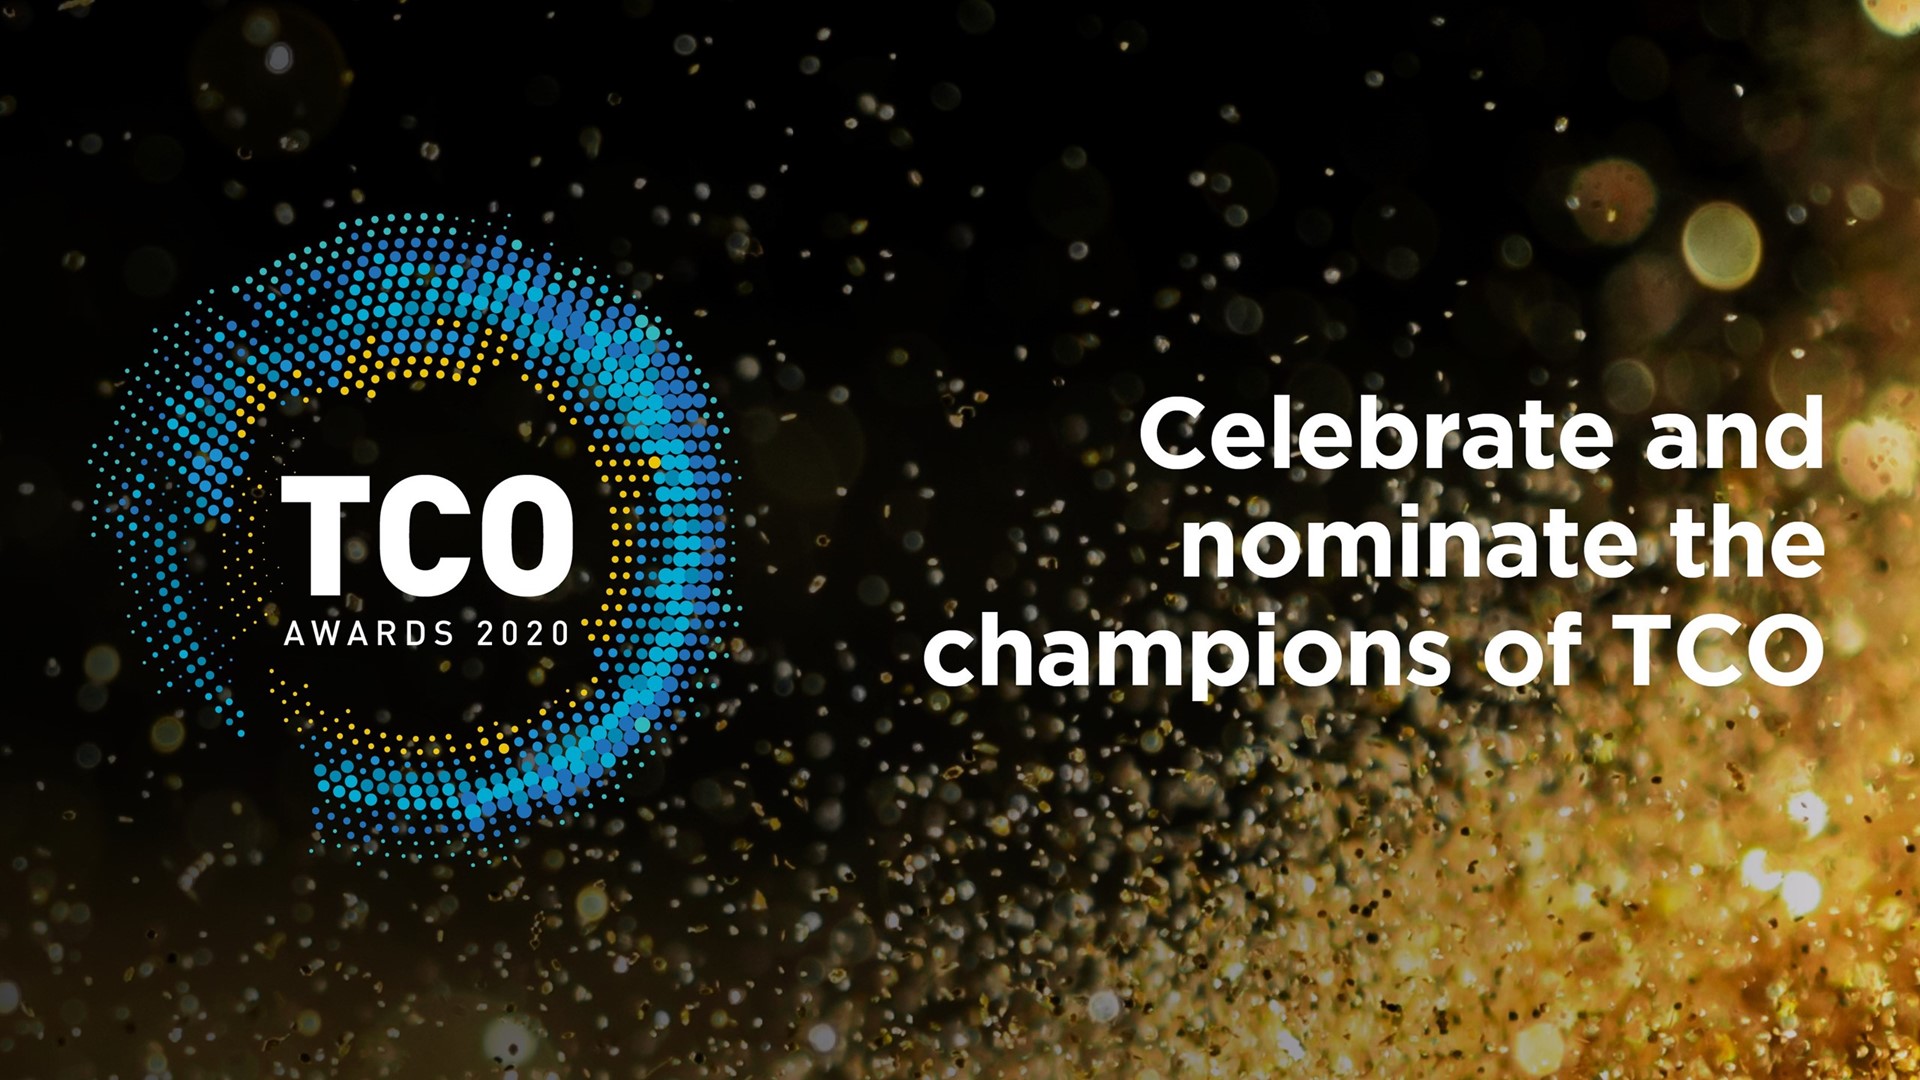 Celebrate and nominate the champion of TCO